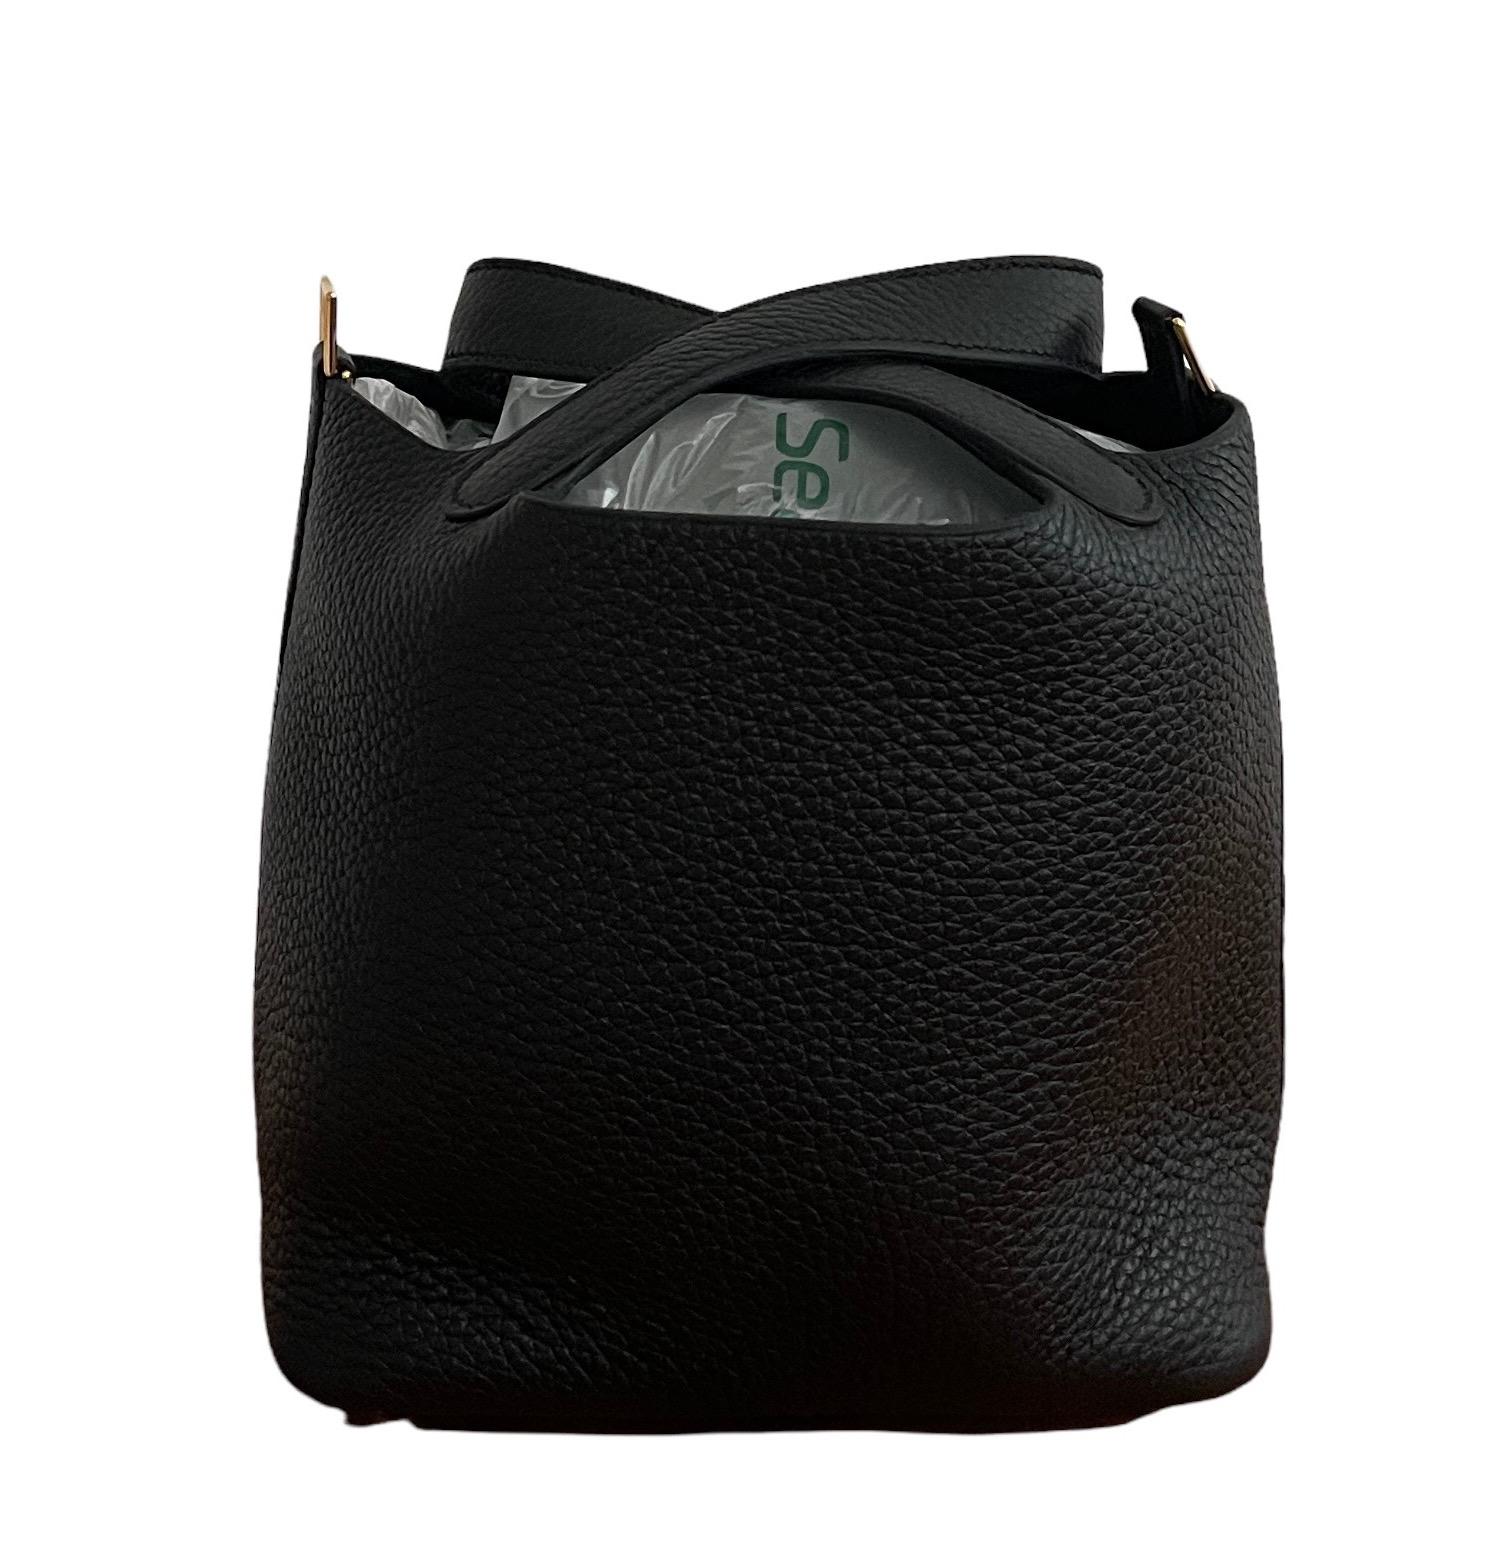 Hermes Picotin Lock
18cm Size
This is the small one, the most wanted size 18cm
Black Clemence with Gold Hardware
Timeless
Its lining-less, clean-cut leather and plain, flexible handles make it the ultimate bag
Bag in taurillon Clemence leather with